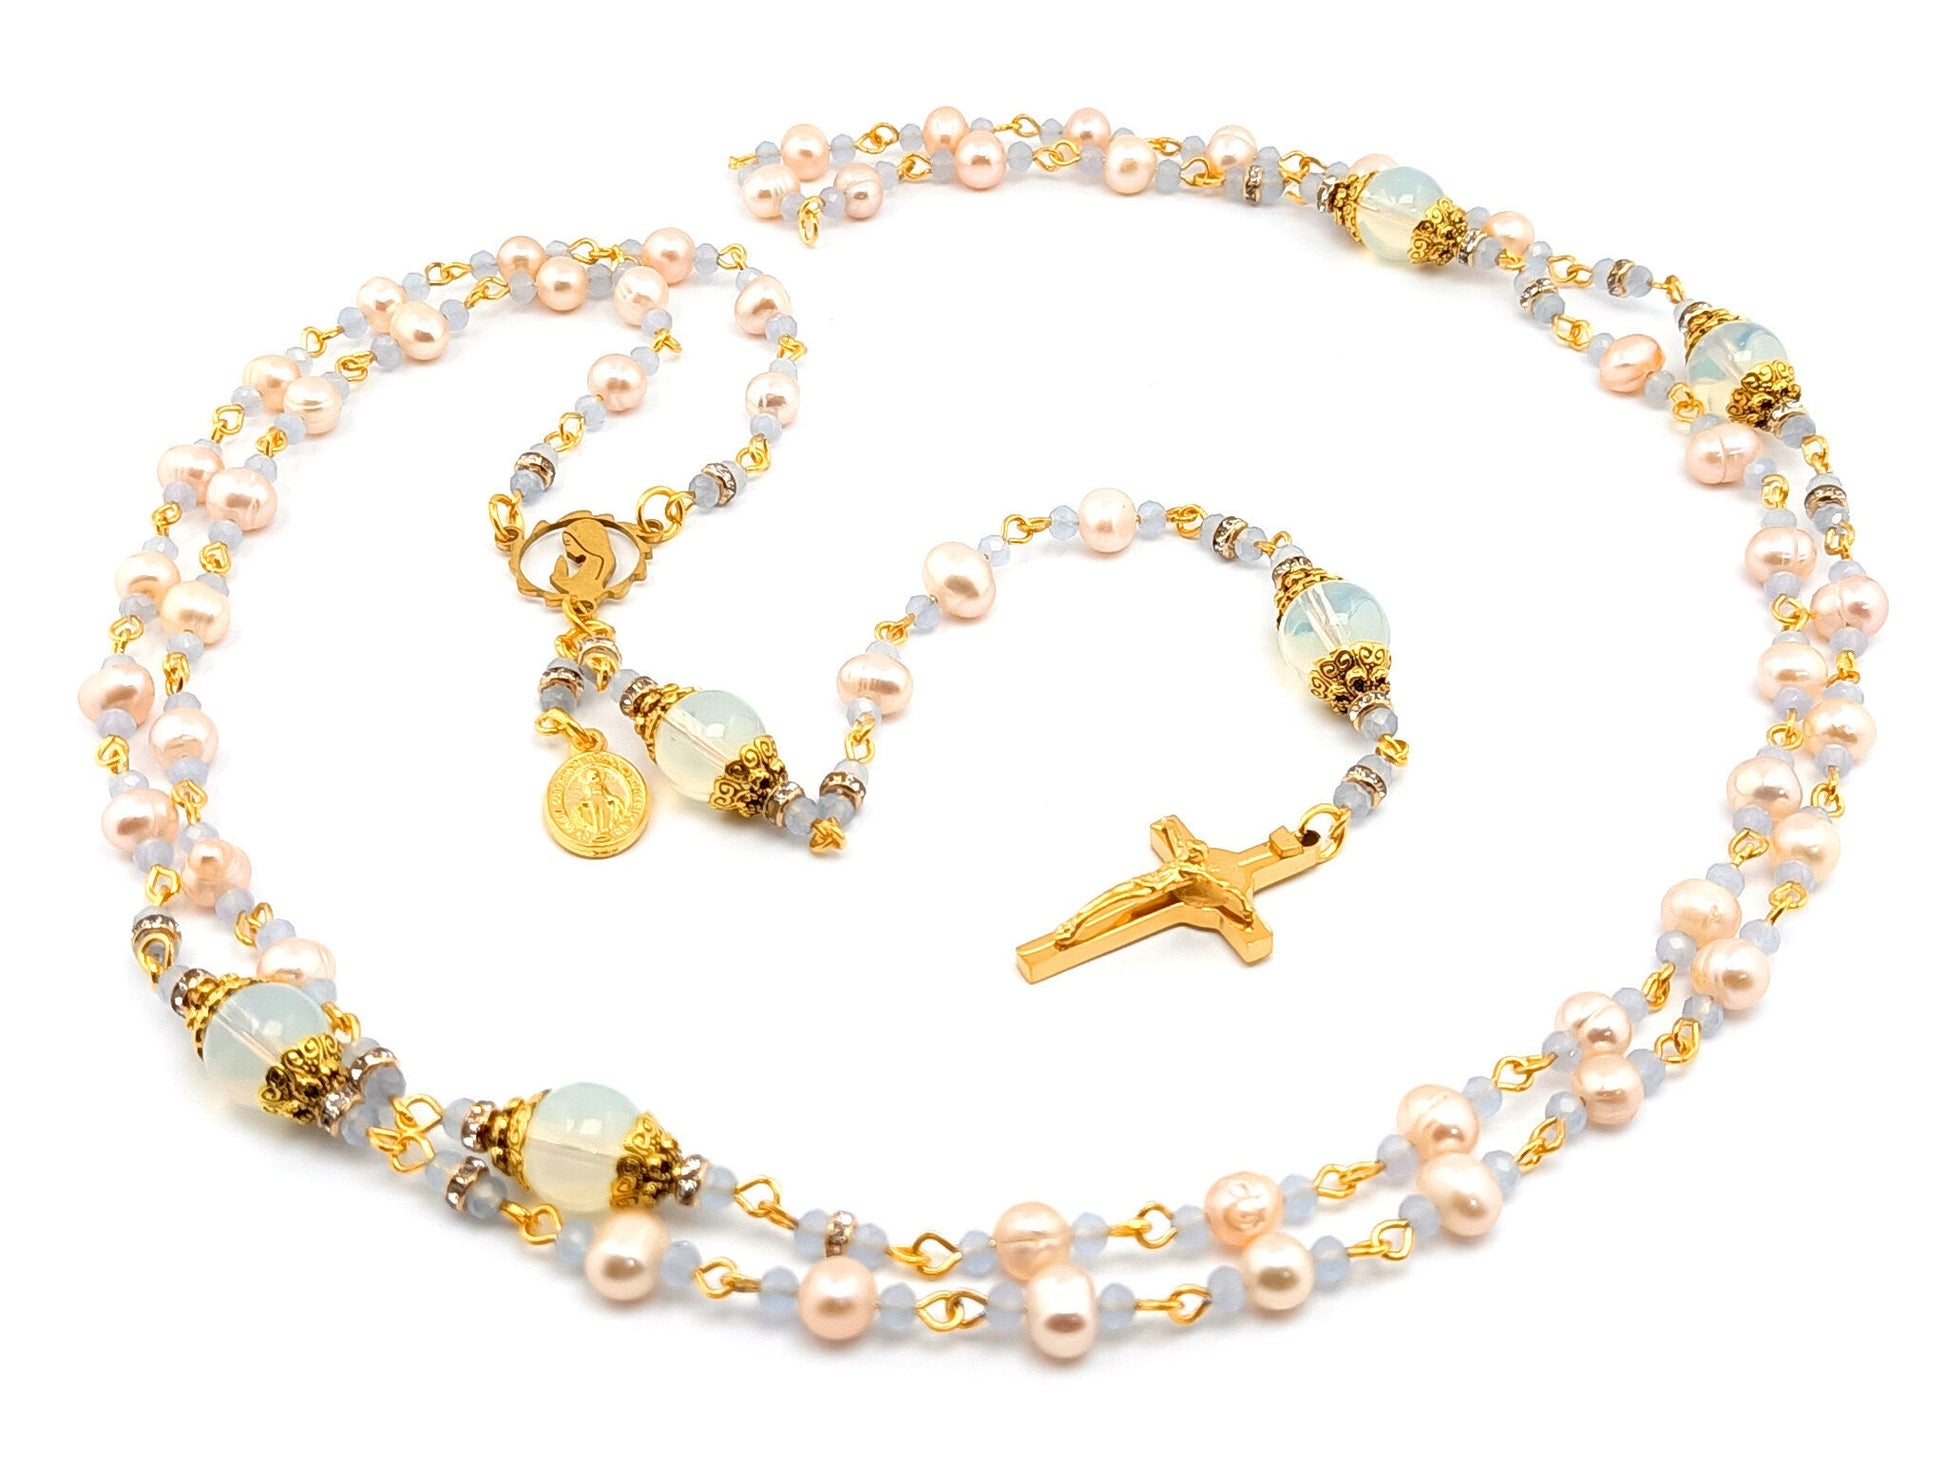 Virgin Mary unique rosary beads freshwater pearls and opal gemstone rosary beads with gold plated stainless steel Saint Benedict crucifix.